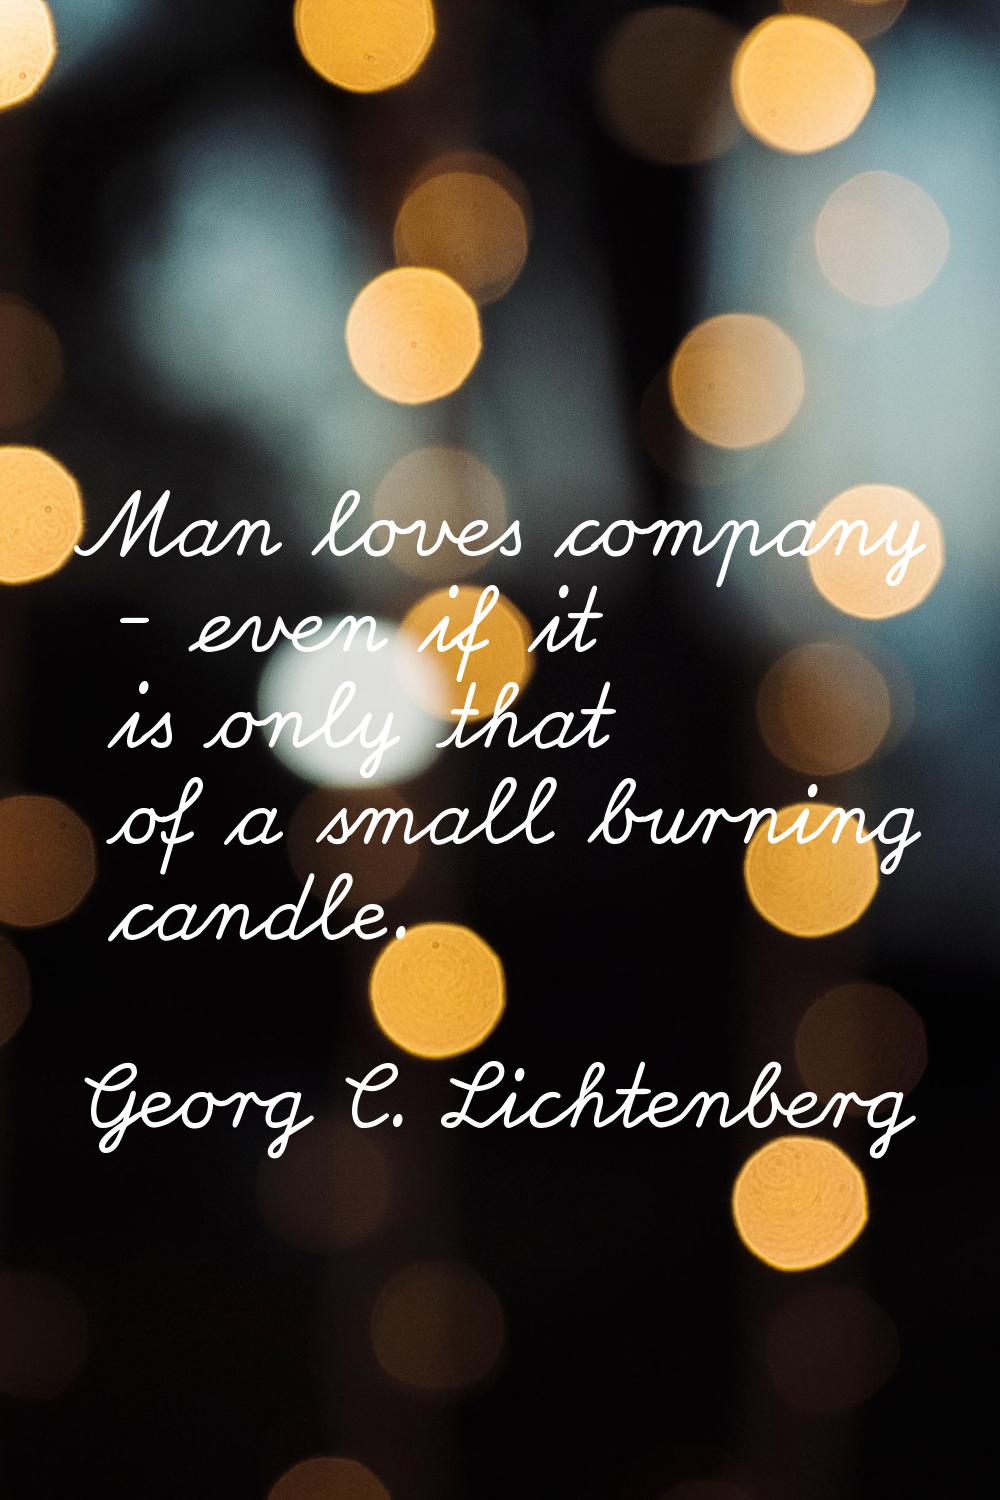 Man loves company - even if it is only that of a small burning candle.